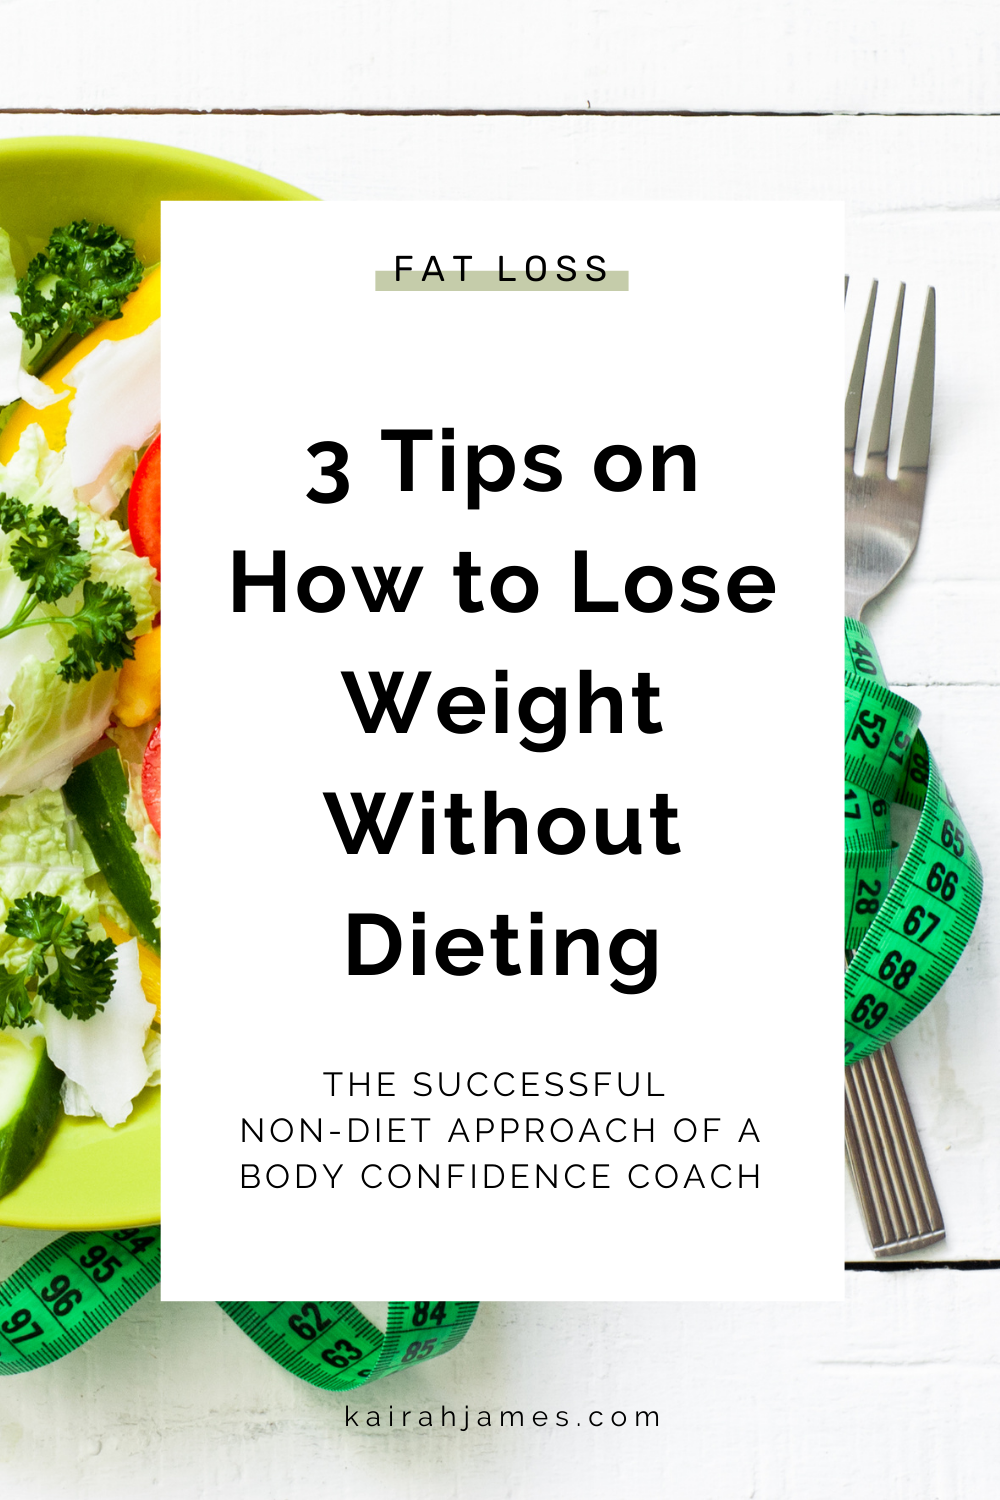 Learn how to lose weight without dieting. When you implement these 3 tips you could lose 10 pounds in a month while still being able to enjoy your favourite foods. That’s the beauty of this non-diet approach! | Weight Loss for Women | Easy Weight Loss | Flexible Dieting #weightlossjourney #8020rule #easywaystoloseweight via @kairahjames